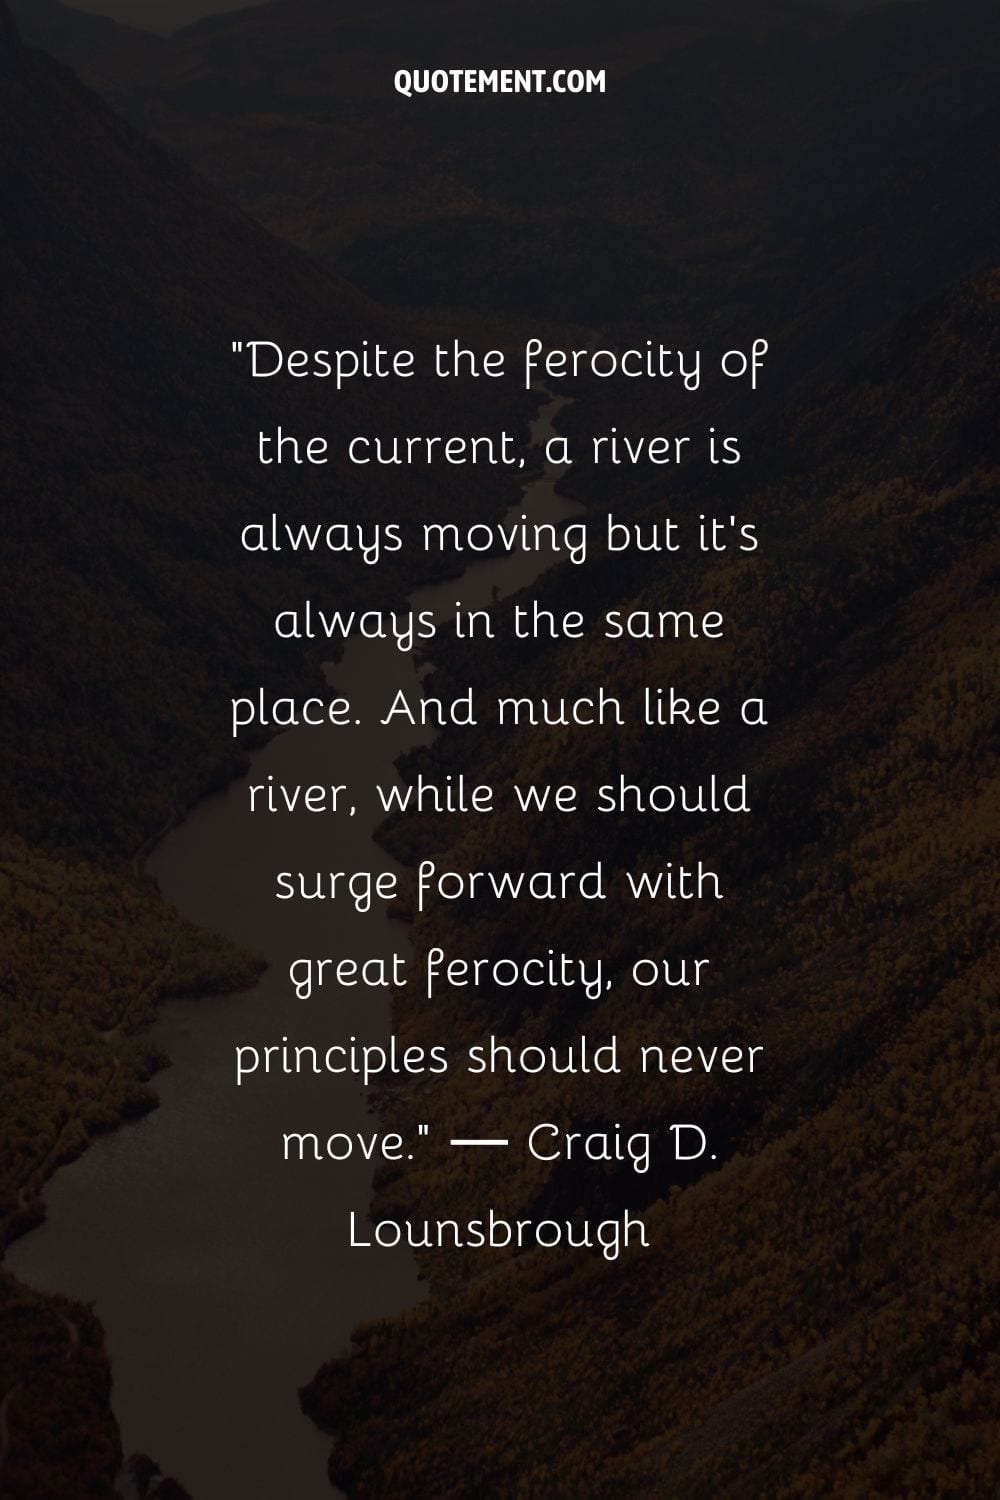 Serene river and towering mountain companions representing beautiful river quote